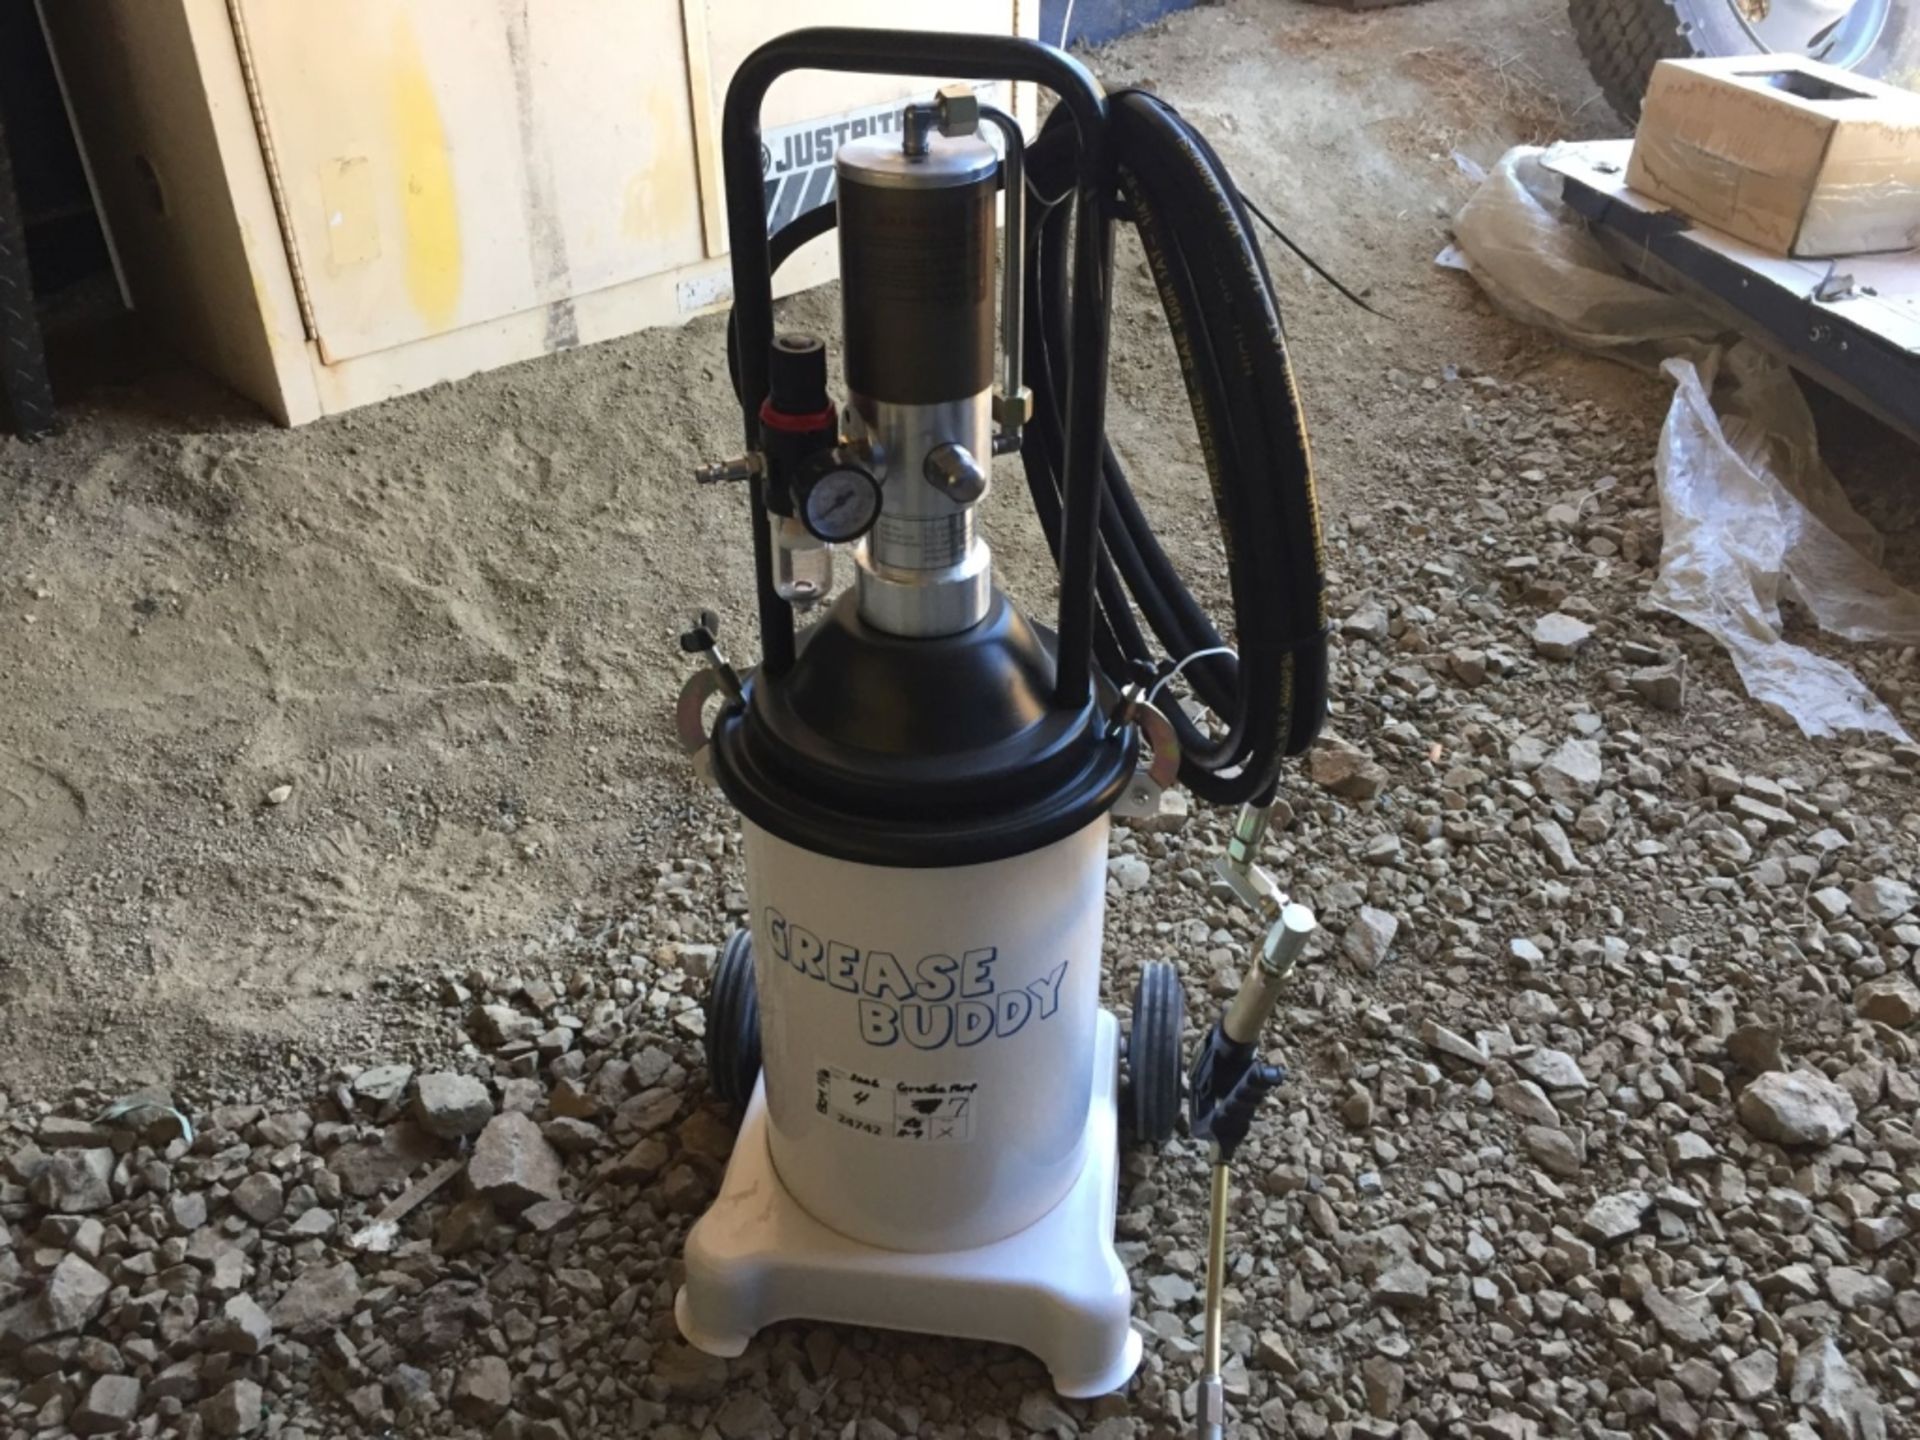 Unused 2020 Grease Buddy Pneumatic Grease Pump. - Image 2 of 8